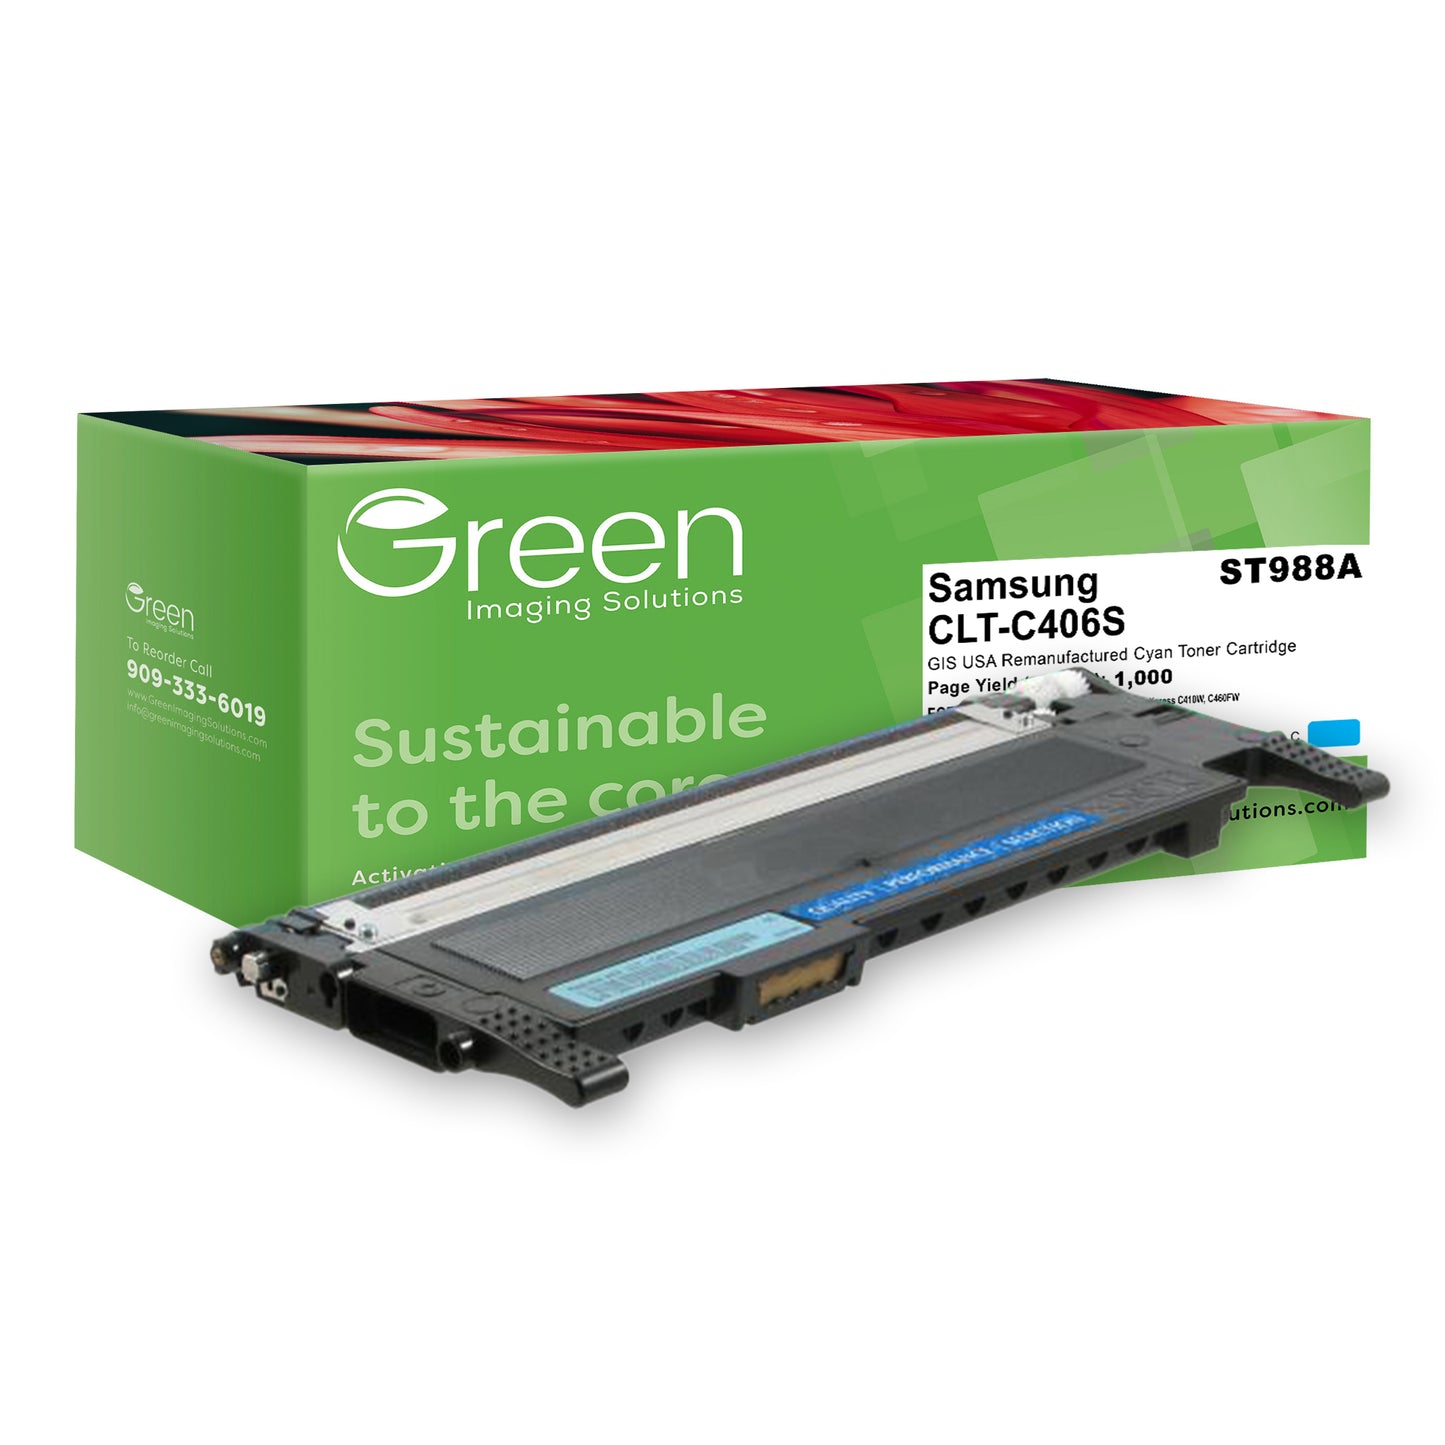 Green Imaging Solutions USA Remanufactured Cyan Toner Cartridge for Samsung CLT-C406S